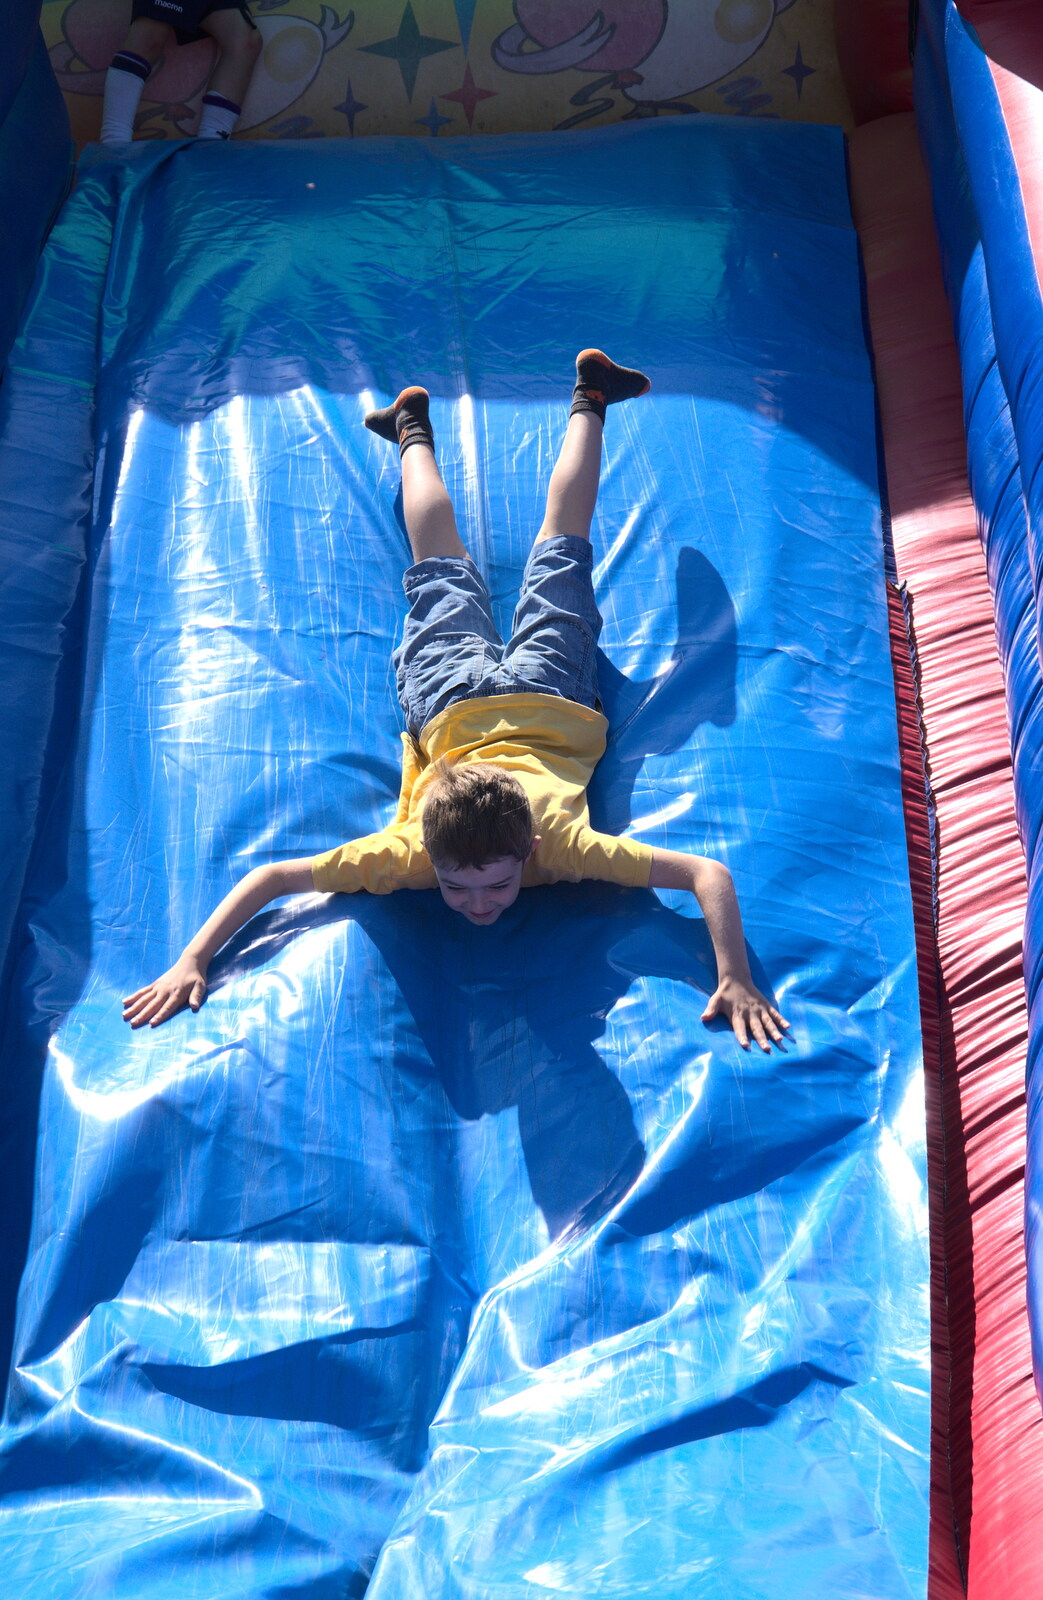 Meanwhile, Fred slides down an inflatable slide from Isobel's 10km Run, Alton Water, Stutton, Suffolk - 6th May 2018